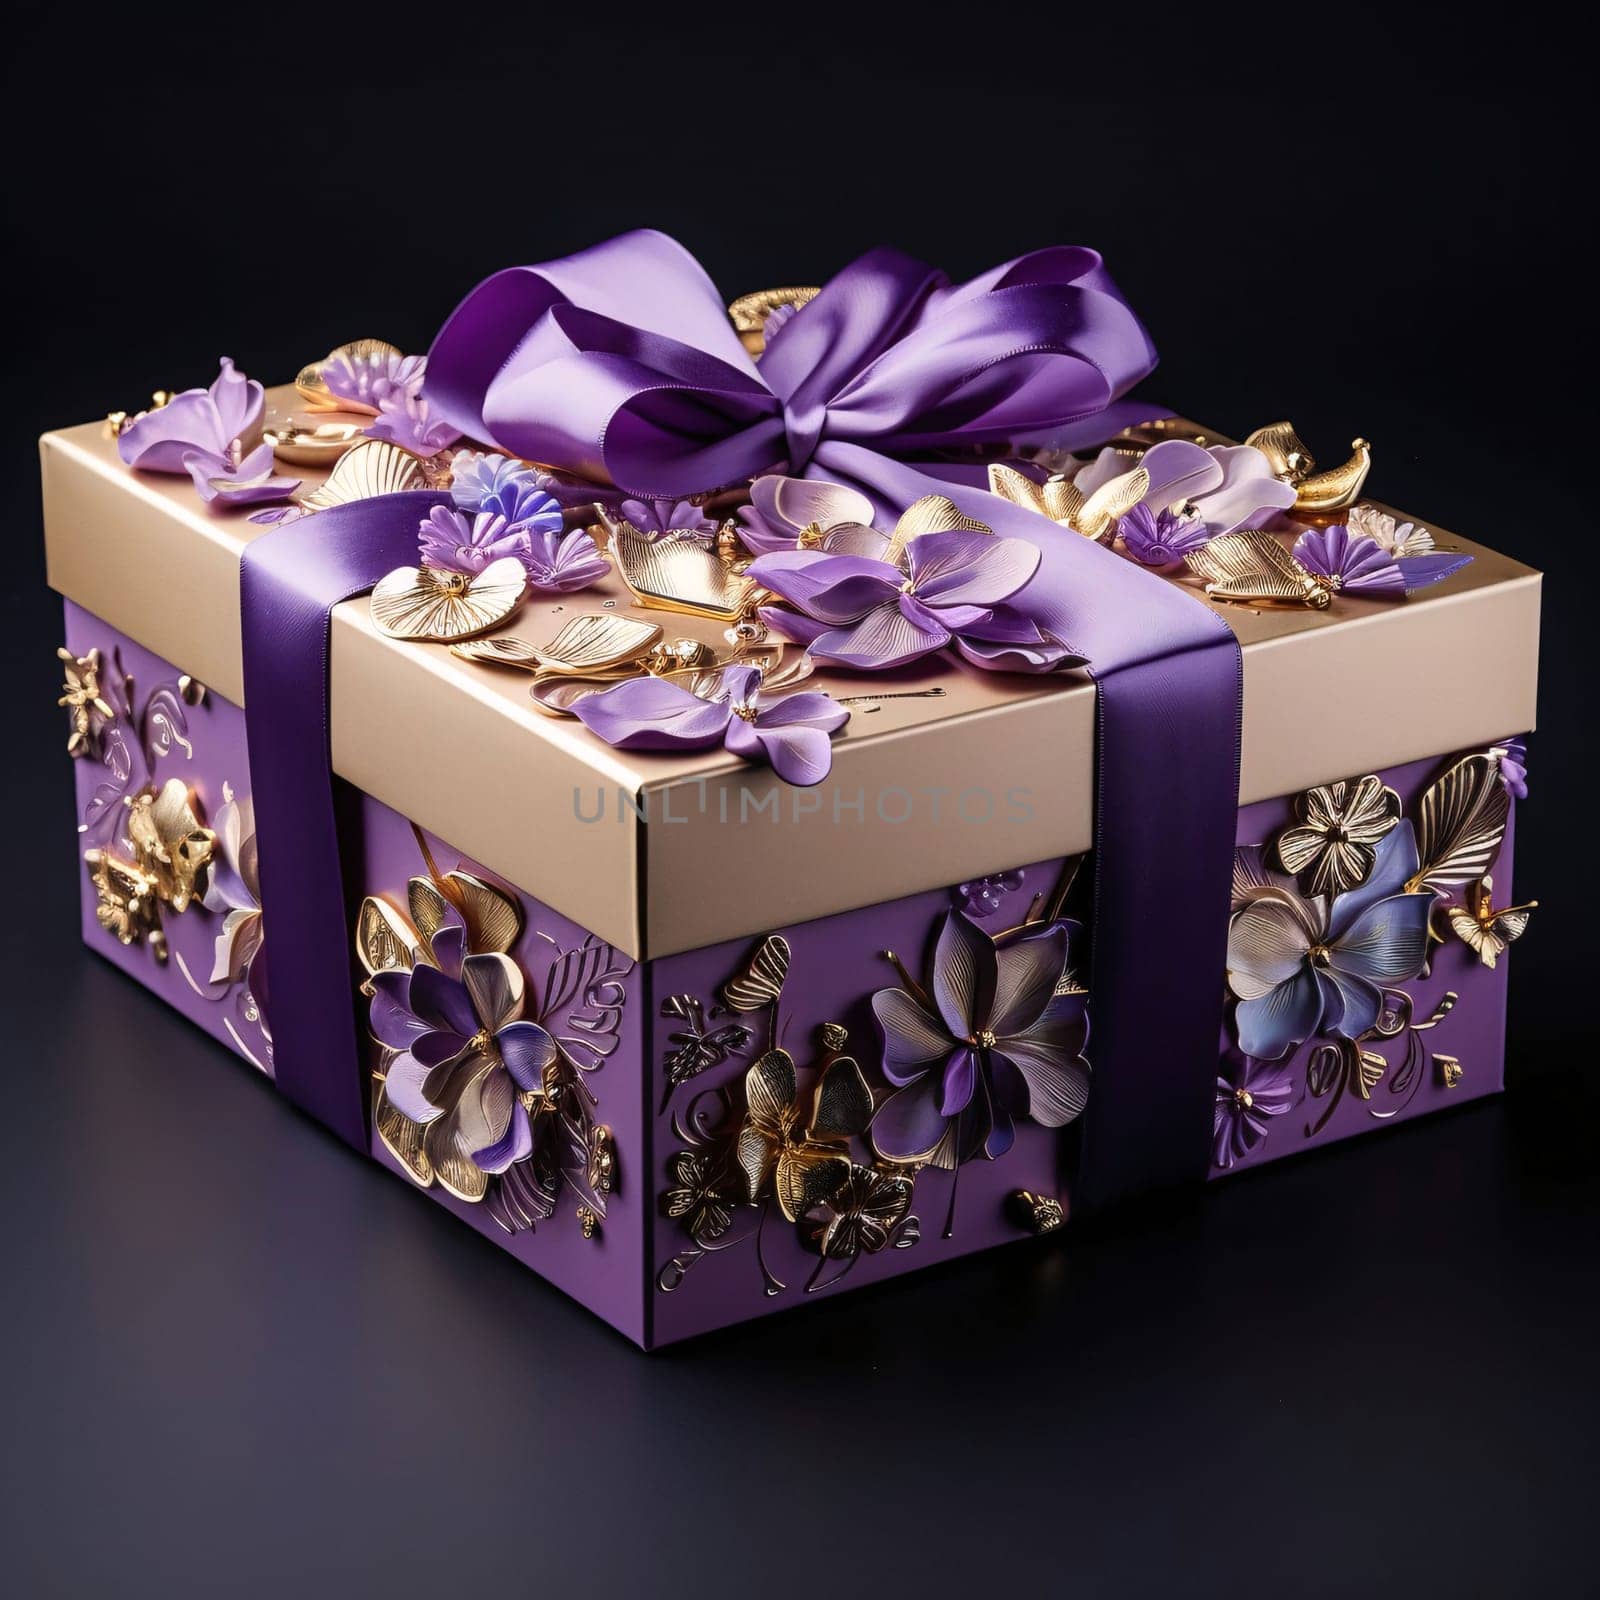 Purple pink box, gift with decorations and a bow. Gifts as a day symbol of present and love. A time of falling in love and love.